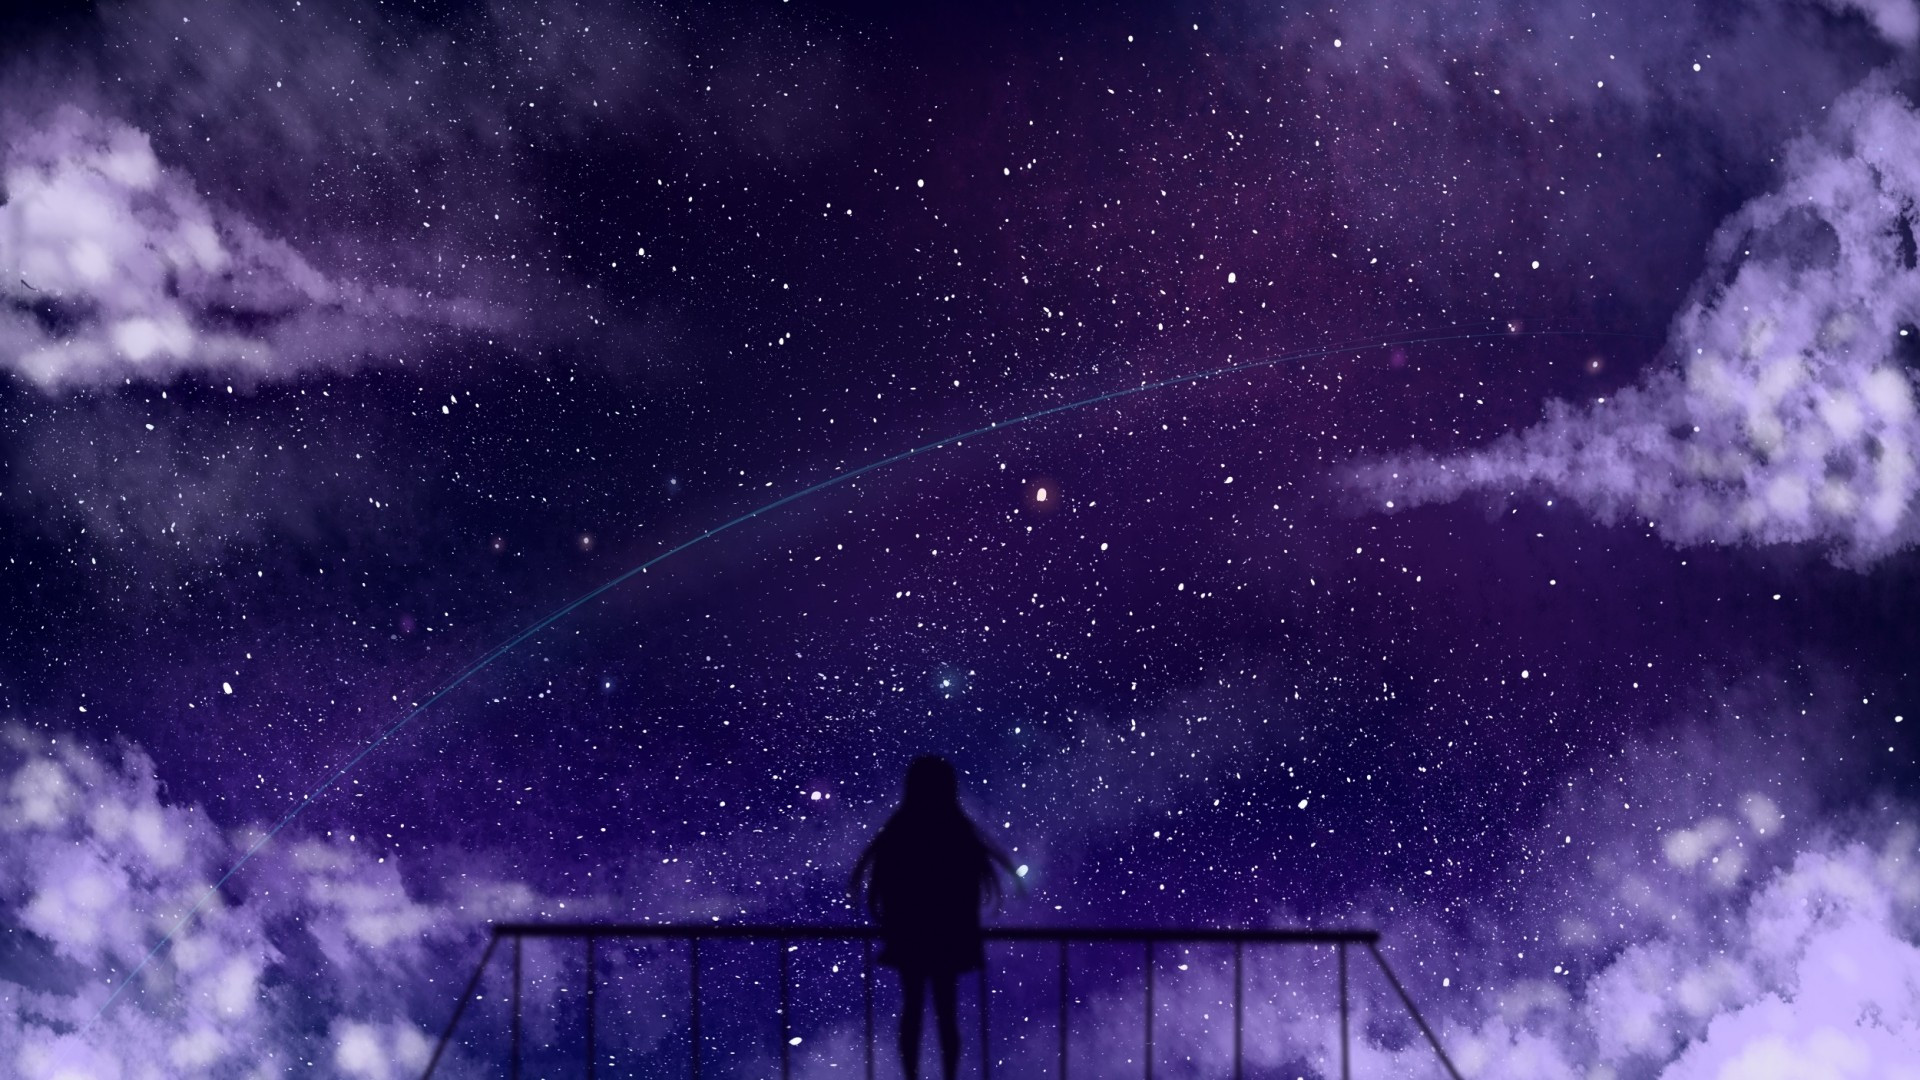 Download 1920x1080 Anime Girl, Stars, Clouds, Fence, Silhouette Wallpaper for Widescreen